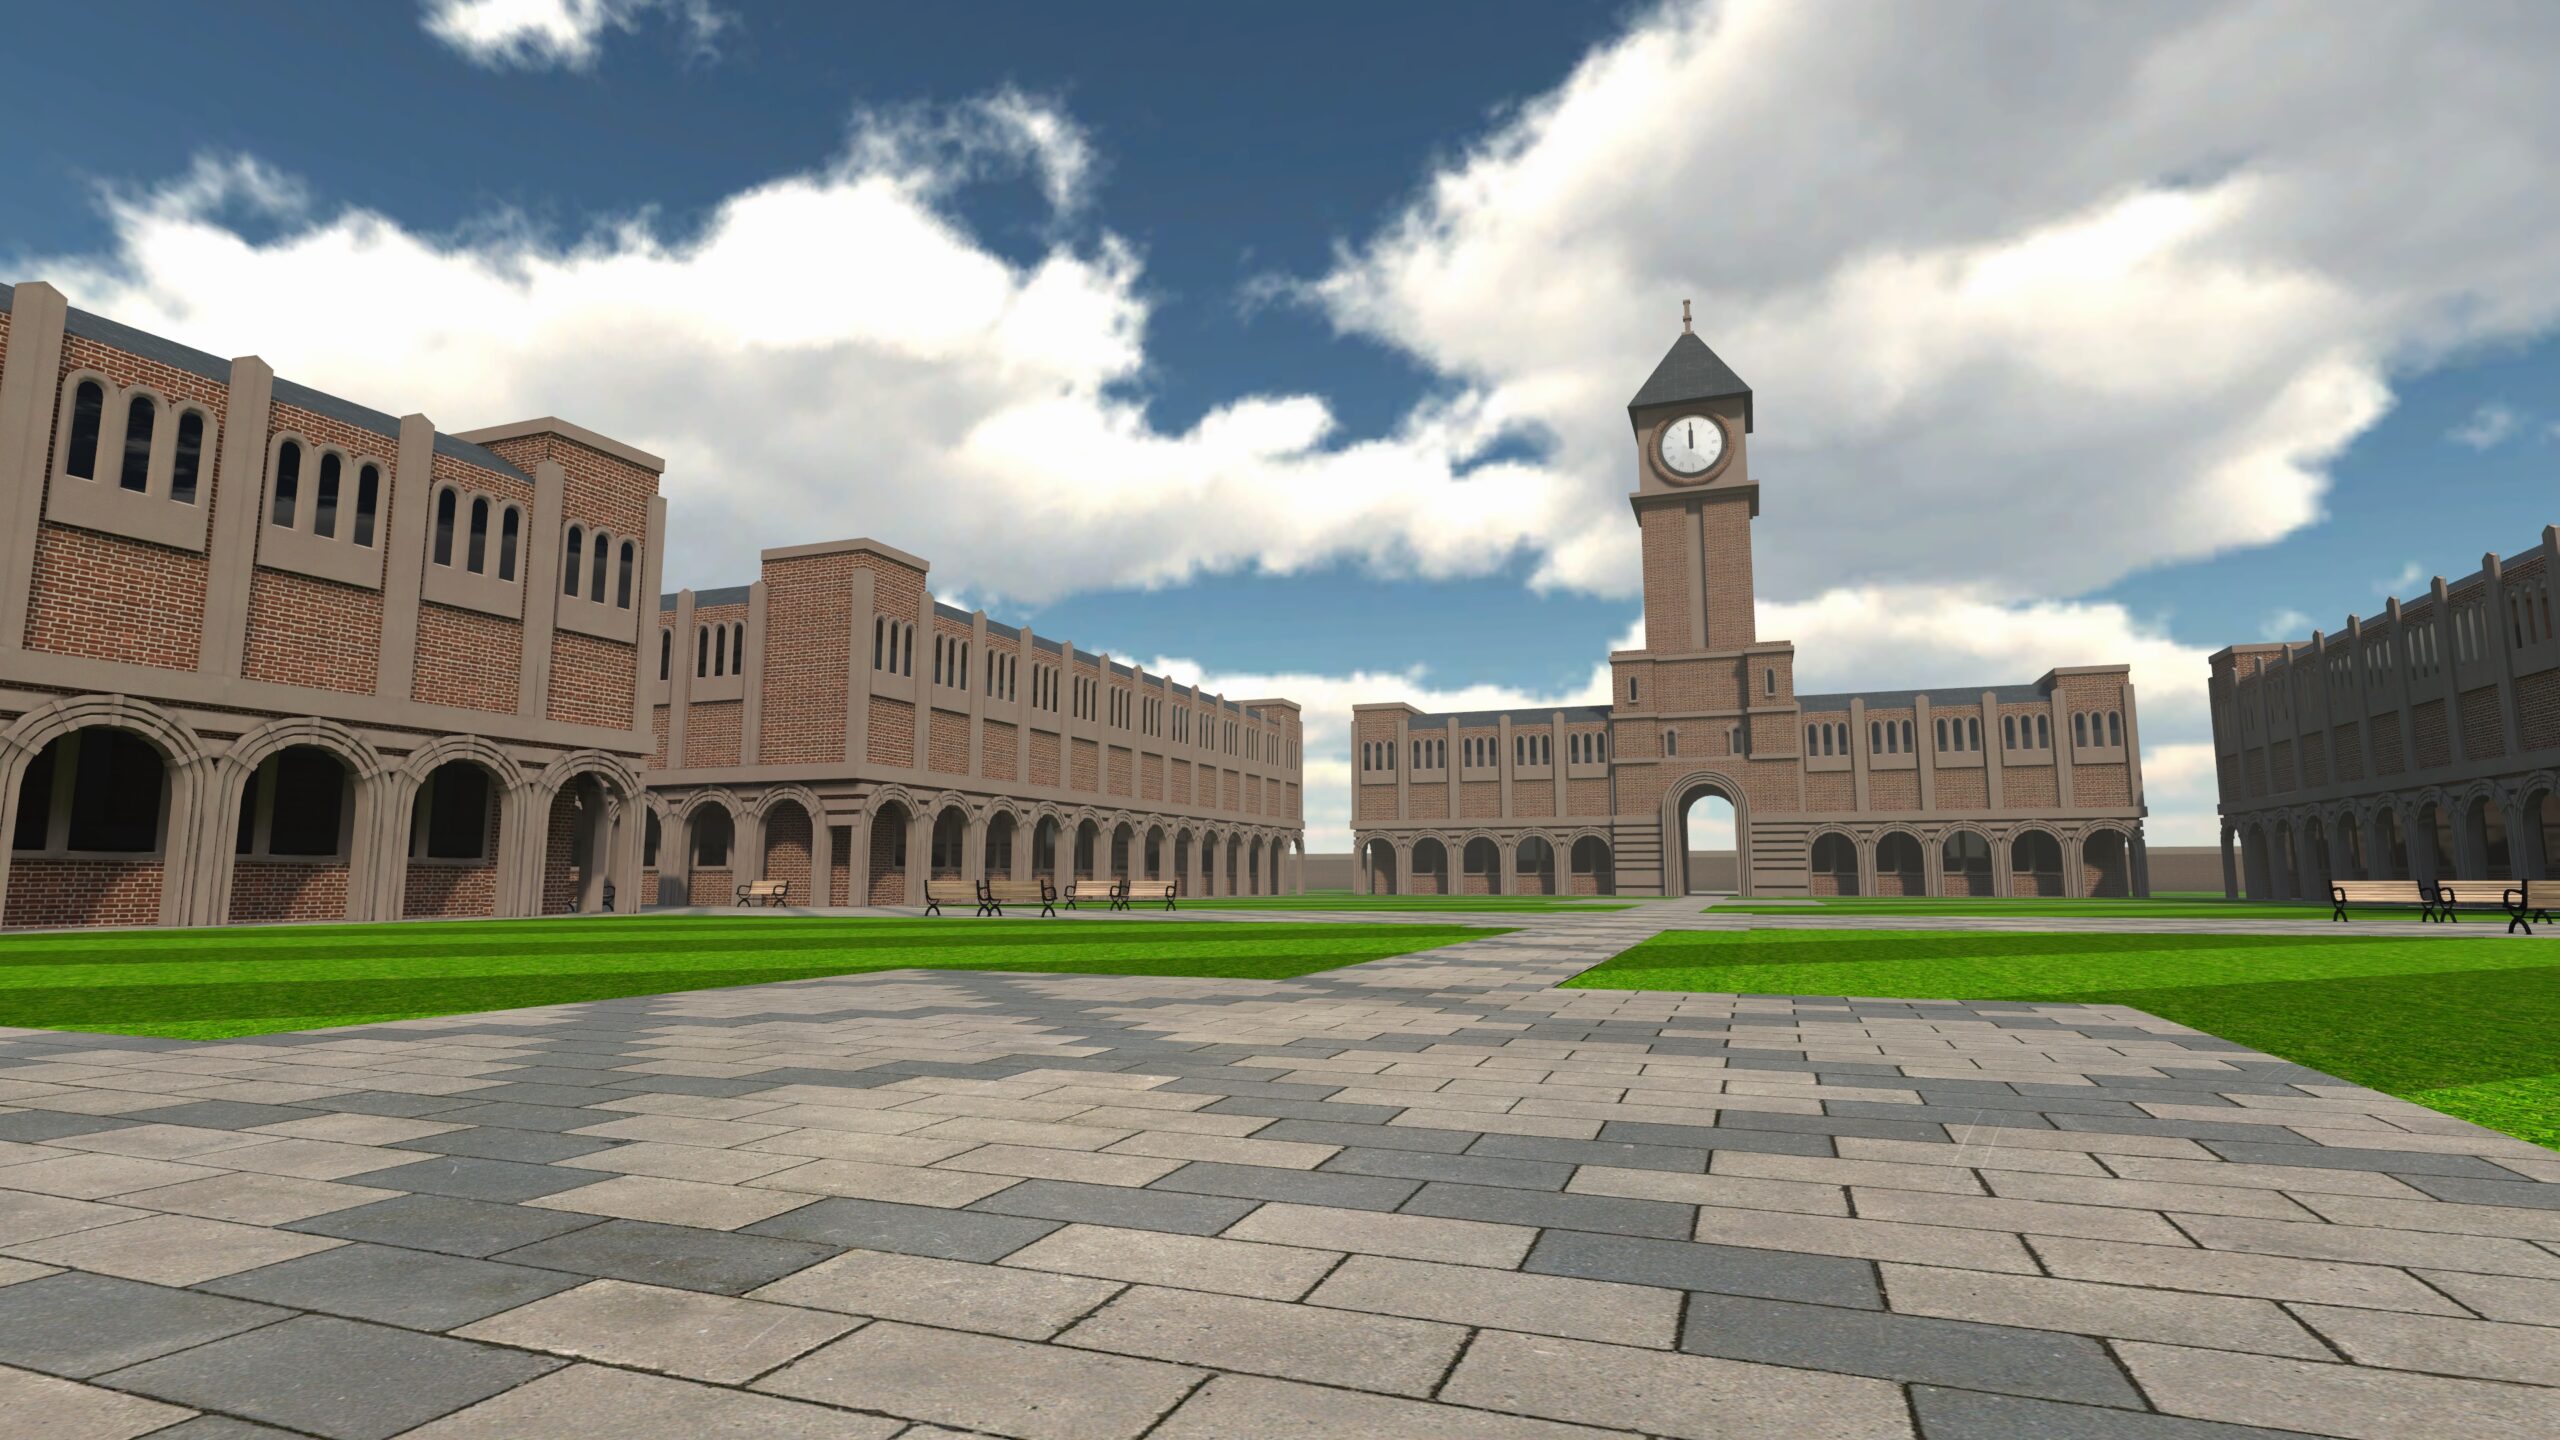 Picture 2 – Victory XR Campus Quad, has virtual grass and pavement, buildings, a clock tower